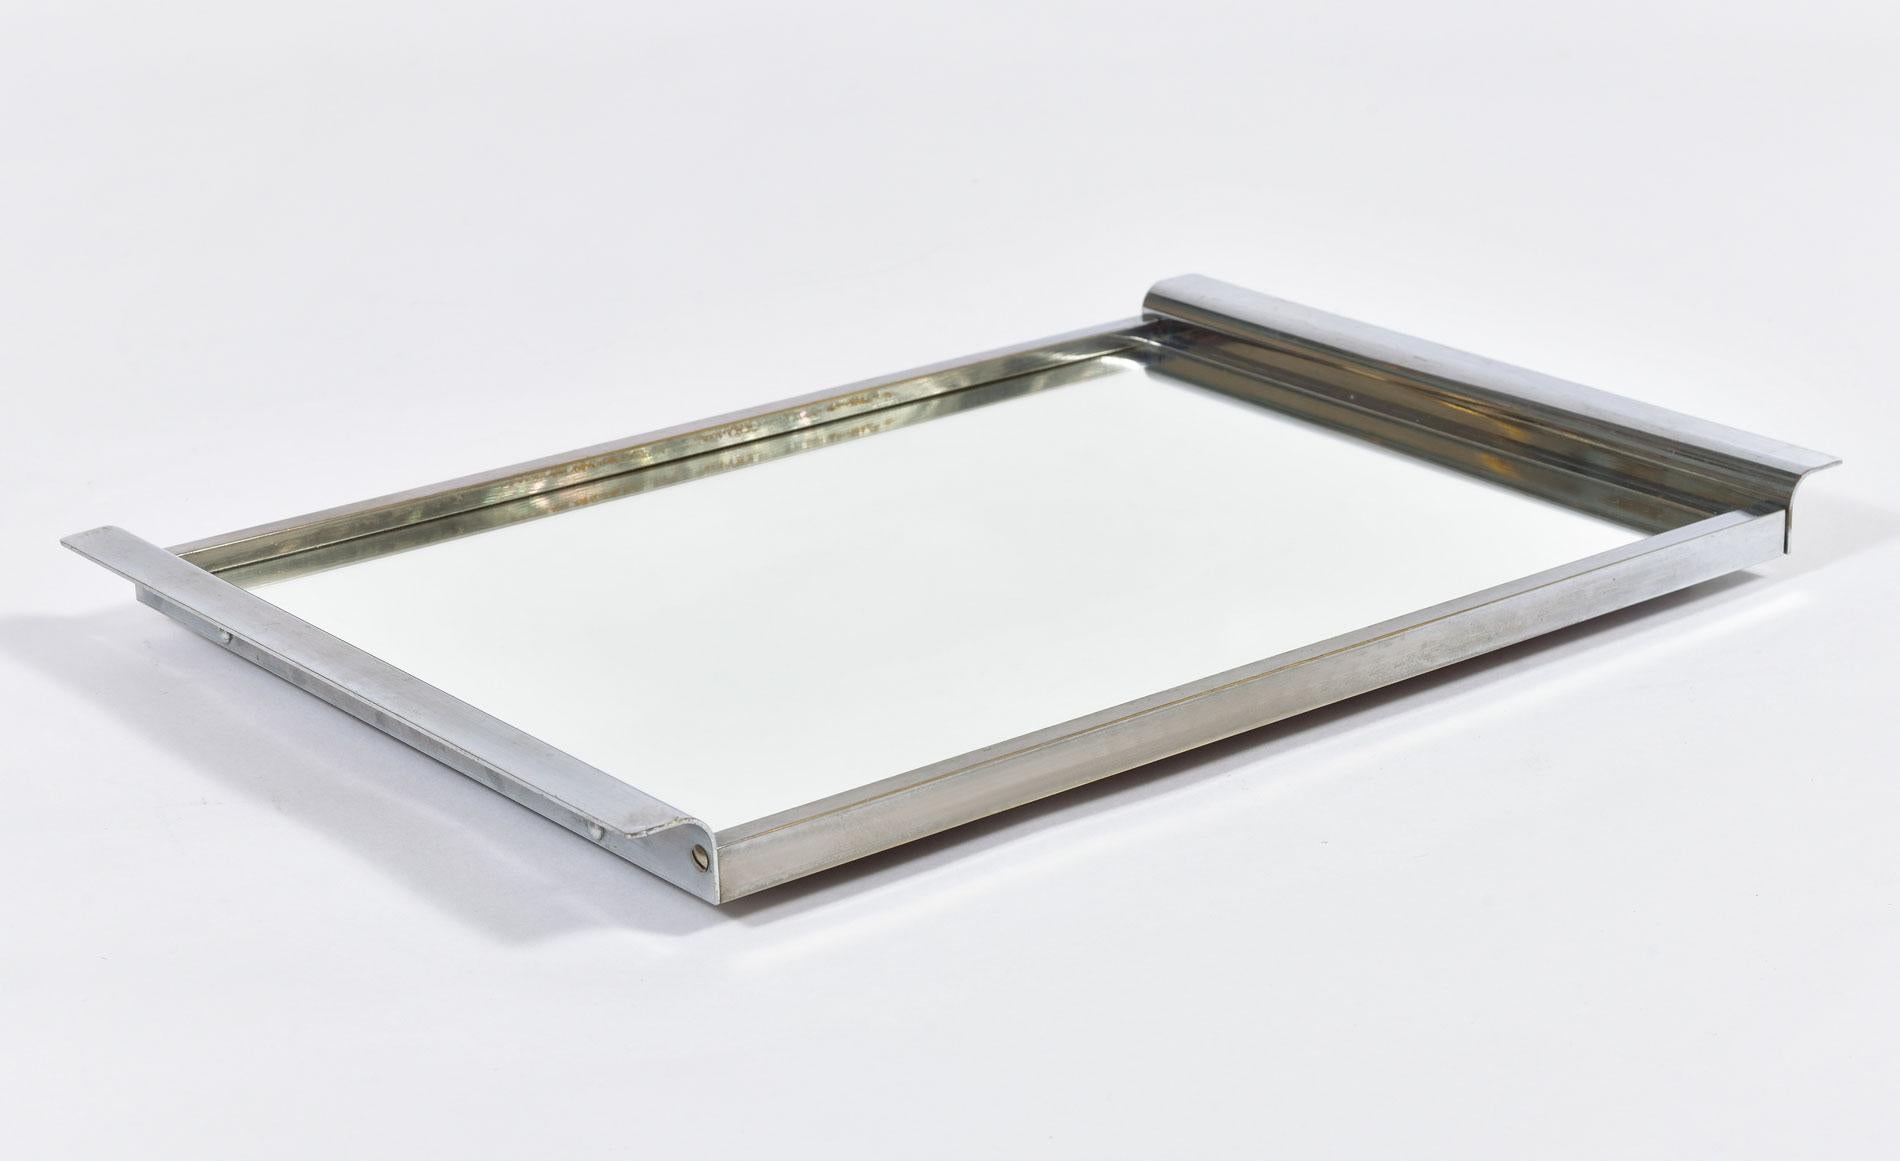 Sleek mirrored tray in an Art Deco style. Curved chrome handles compliment simple chrome frame and mirrored top. Perfect for serving drinks or for displaying bathroom or dressing-table items.